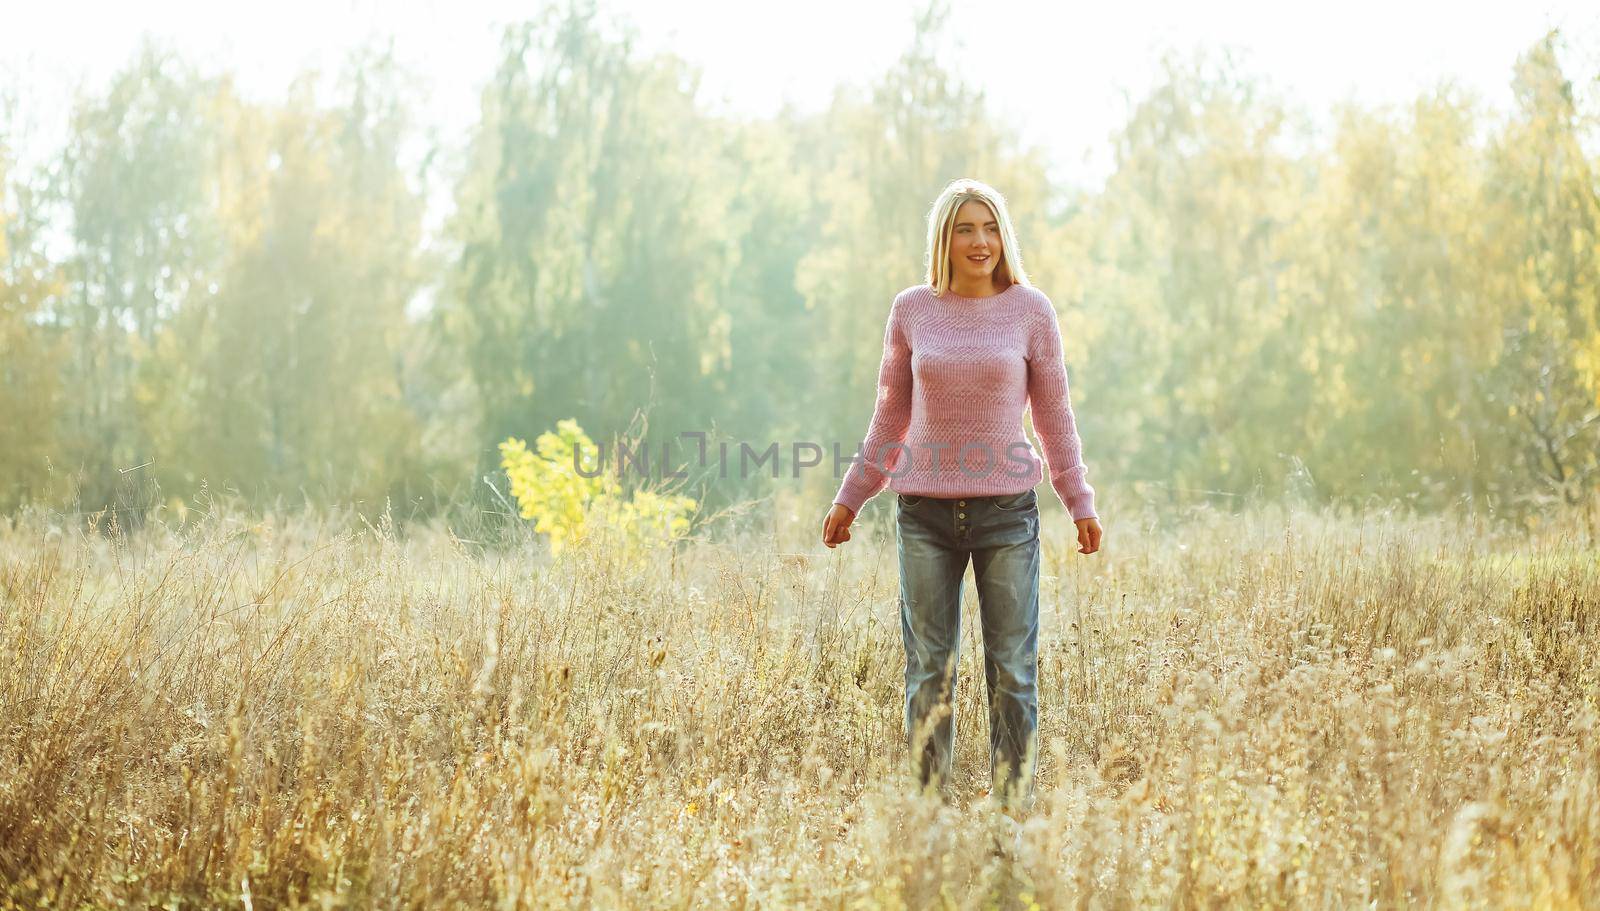 Charming blonde standing alone on the lawn among autumn or summer nature backlit by sunlight. Relaxation concept, Freedom concept.